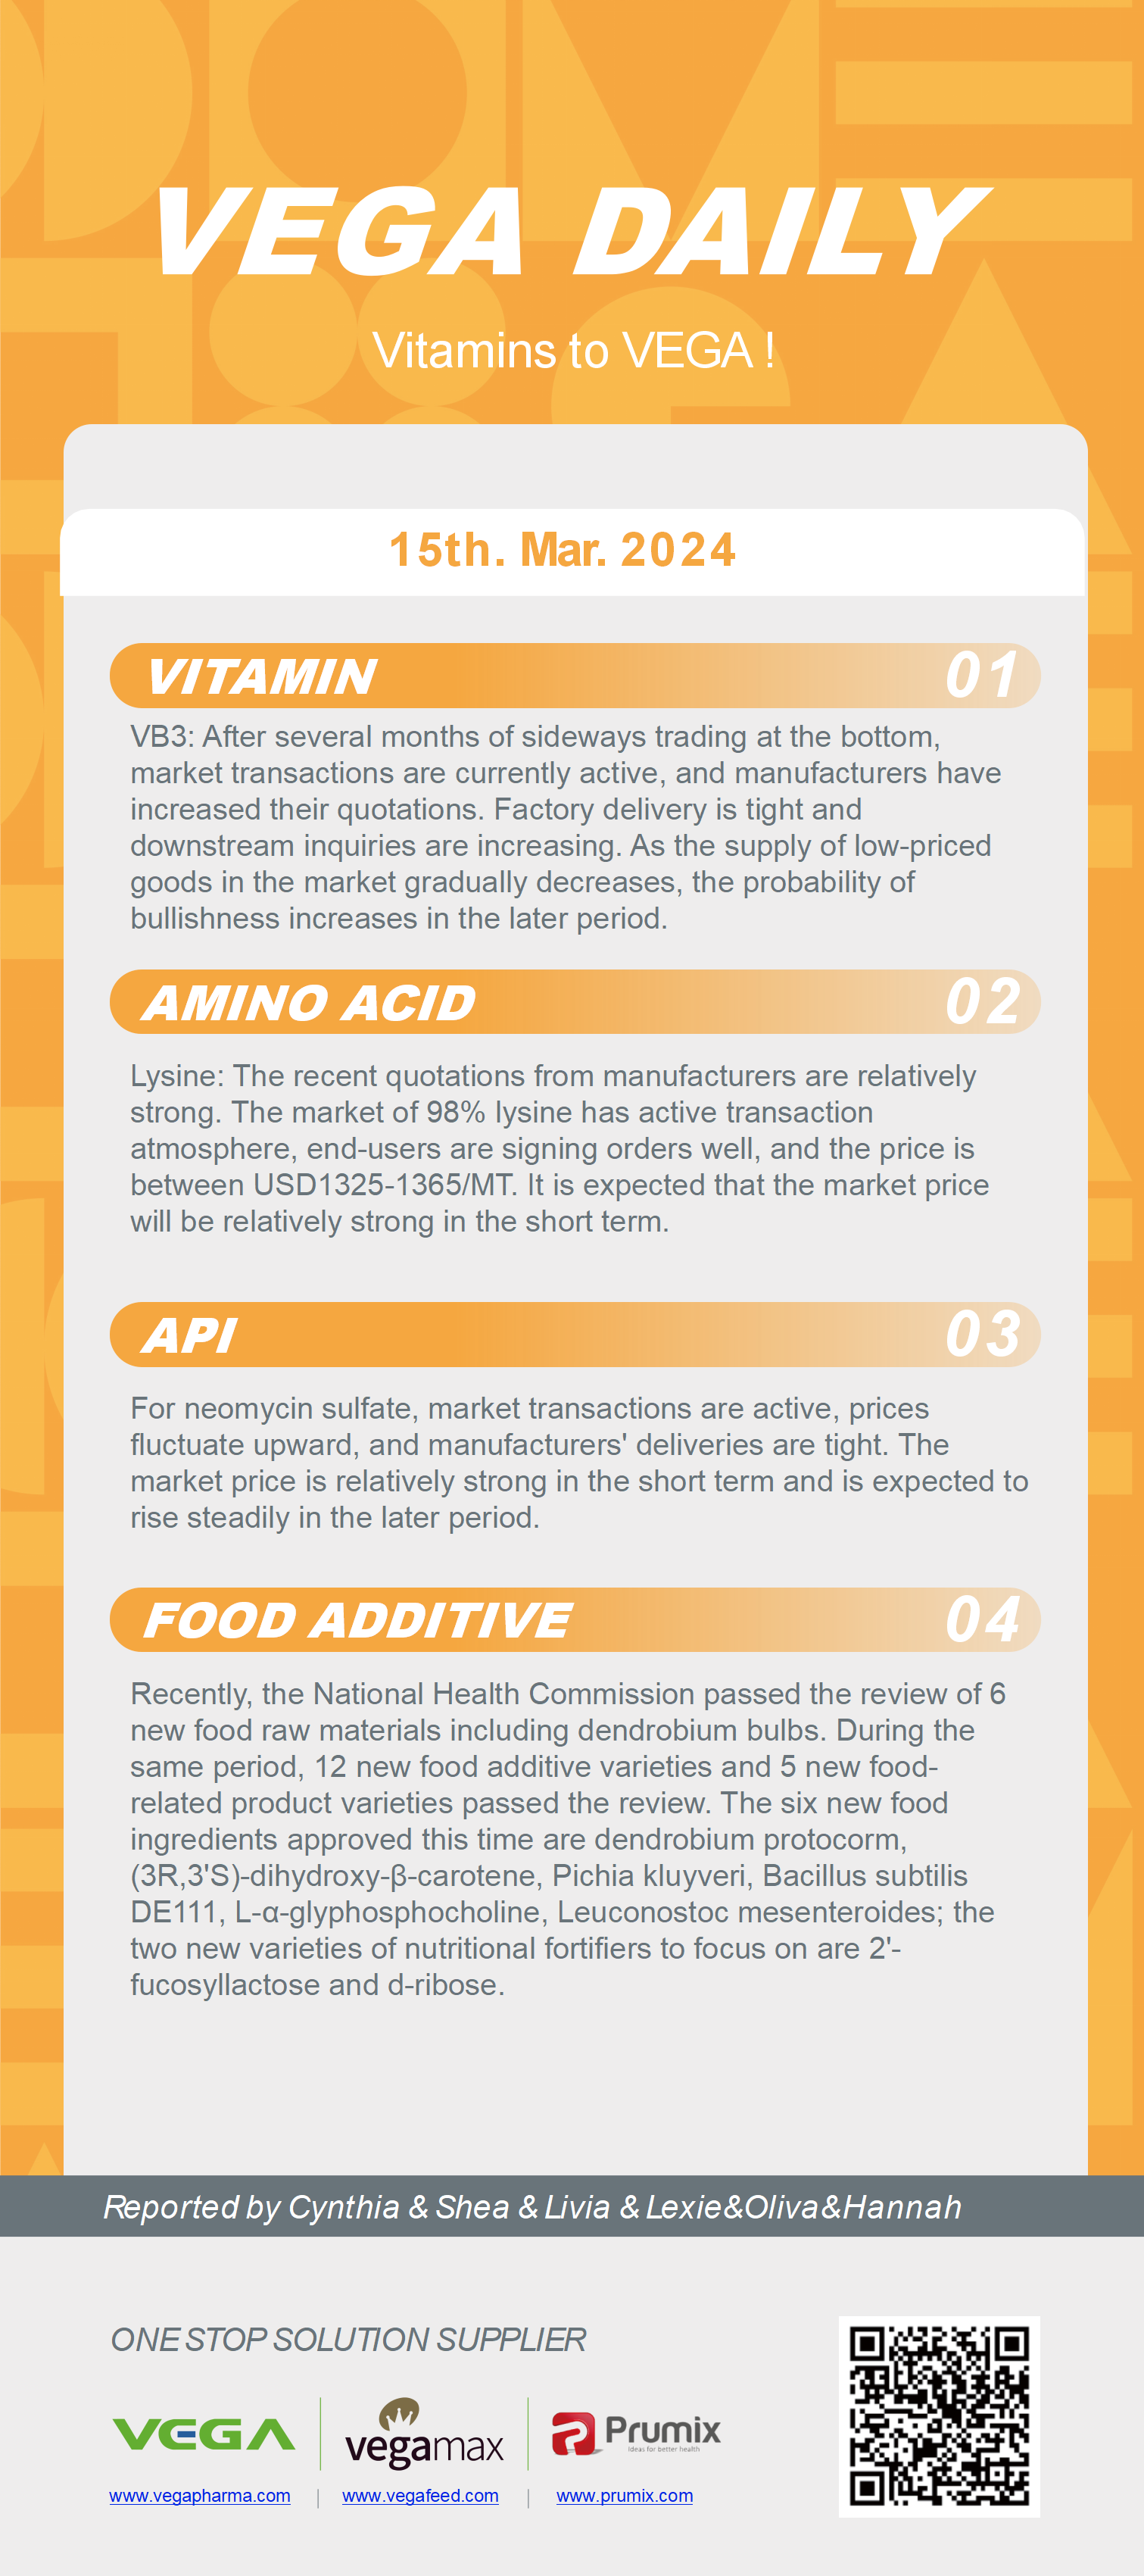 Vega Daily Dated on Mar 15th 2024 Vitamin Amino Acid APl Food Additives.png